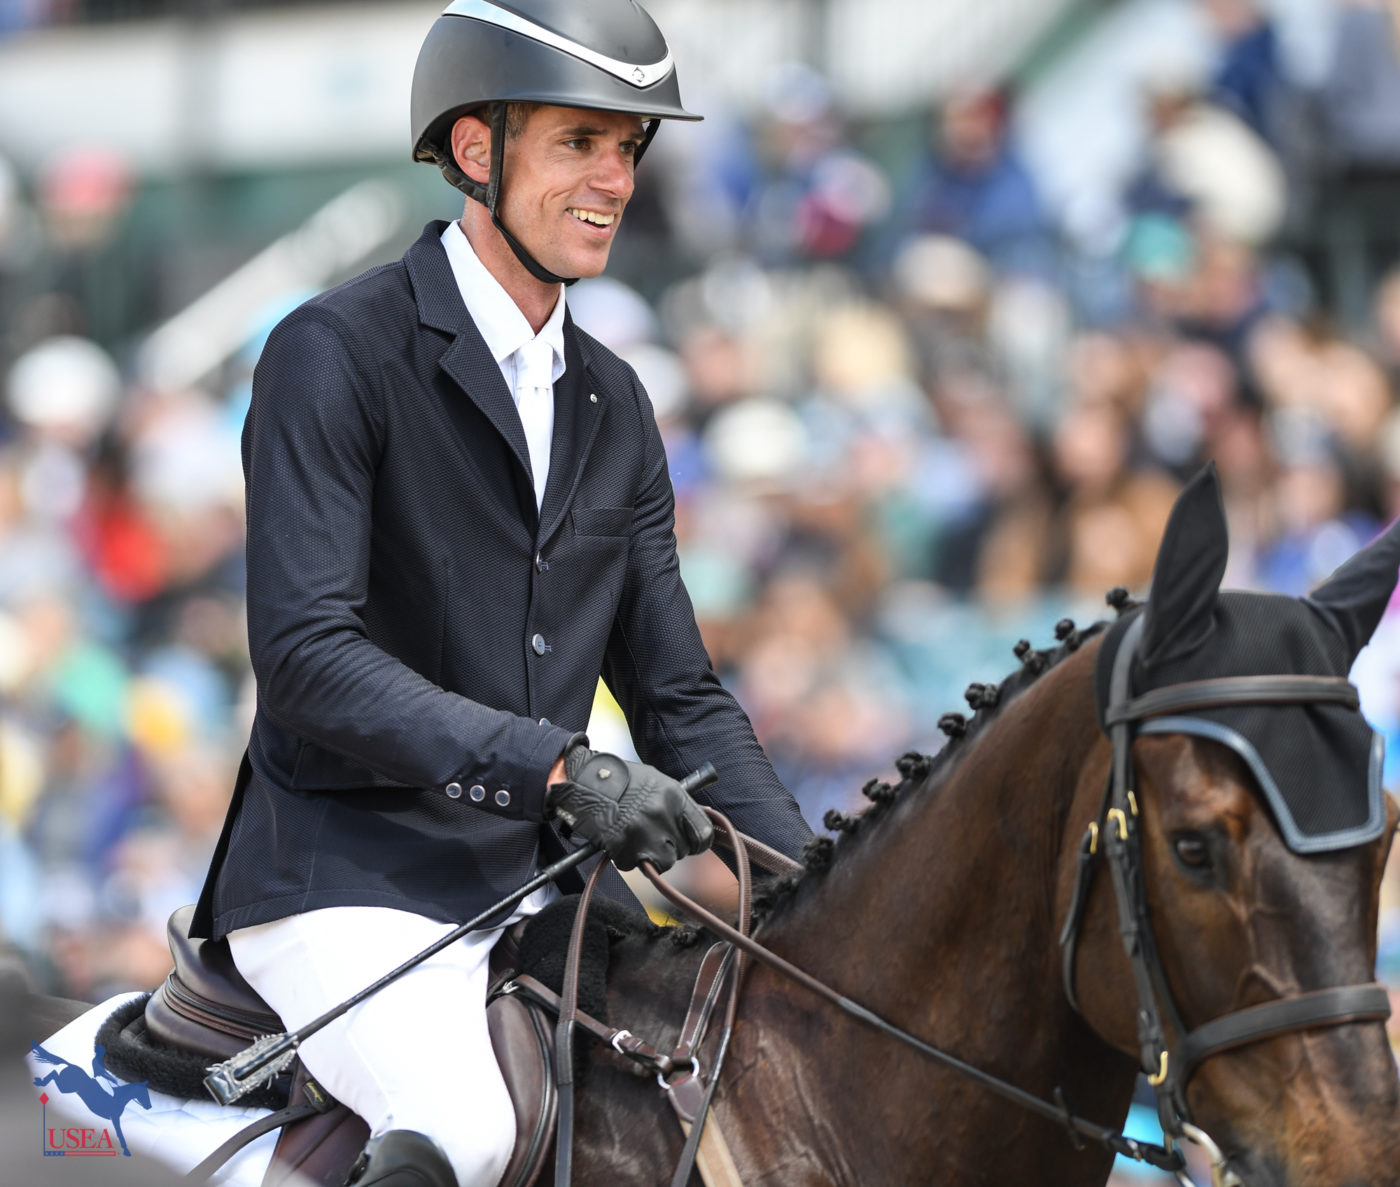 Dan Kreitl headed towards his supporters after a clear round on Carmango in the CCI4*-S. USEA/Lindsay Berreth photo